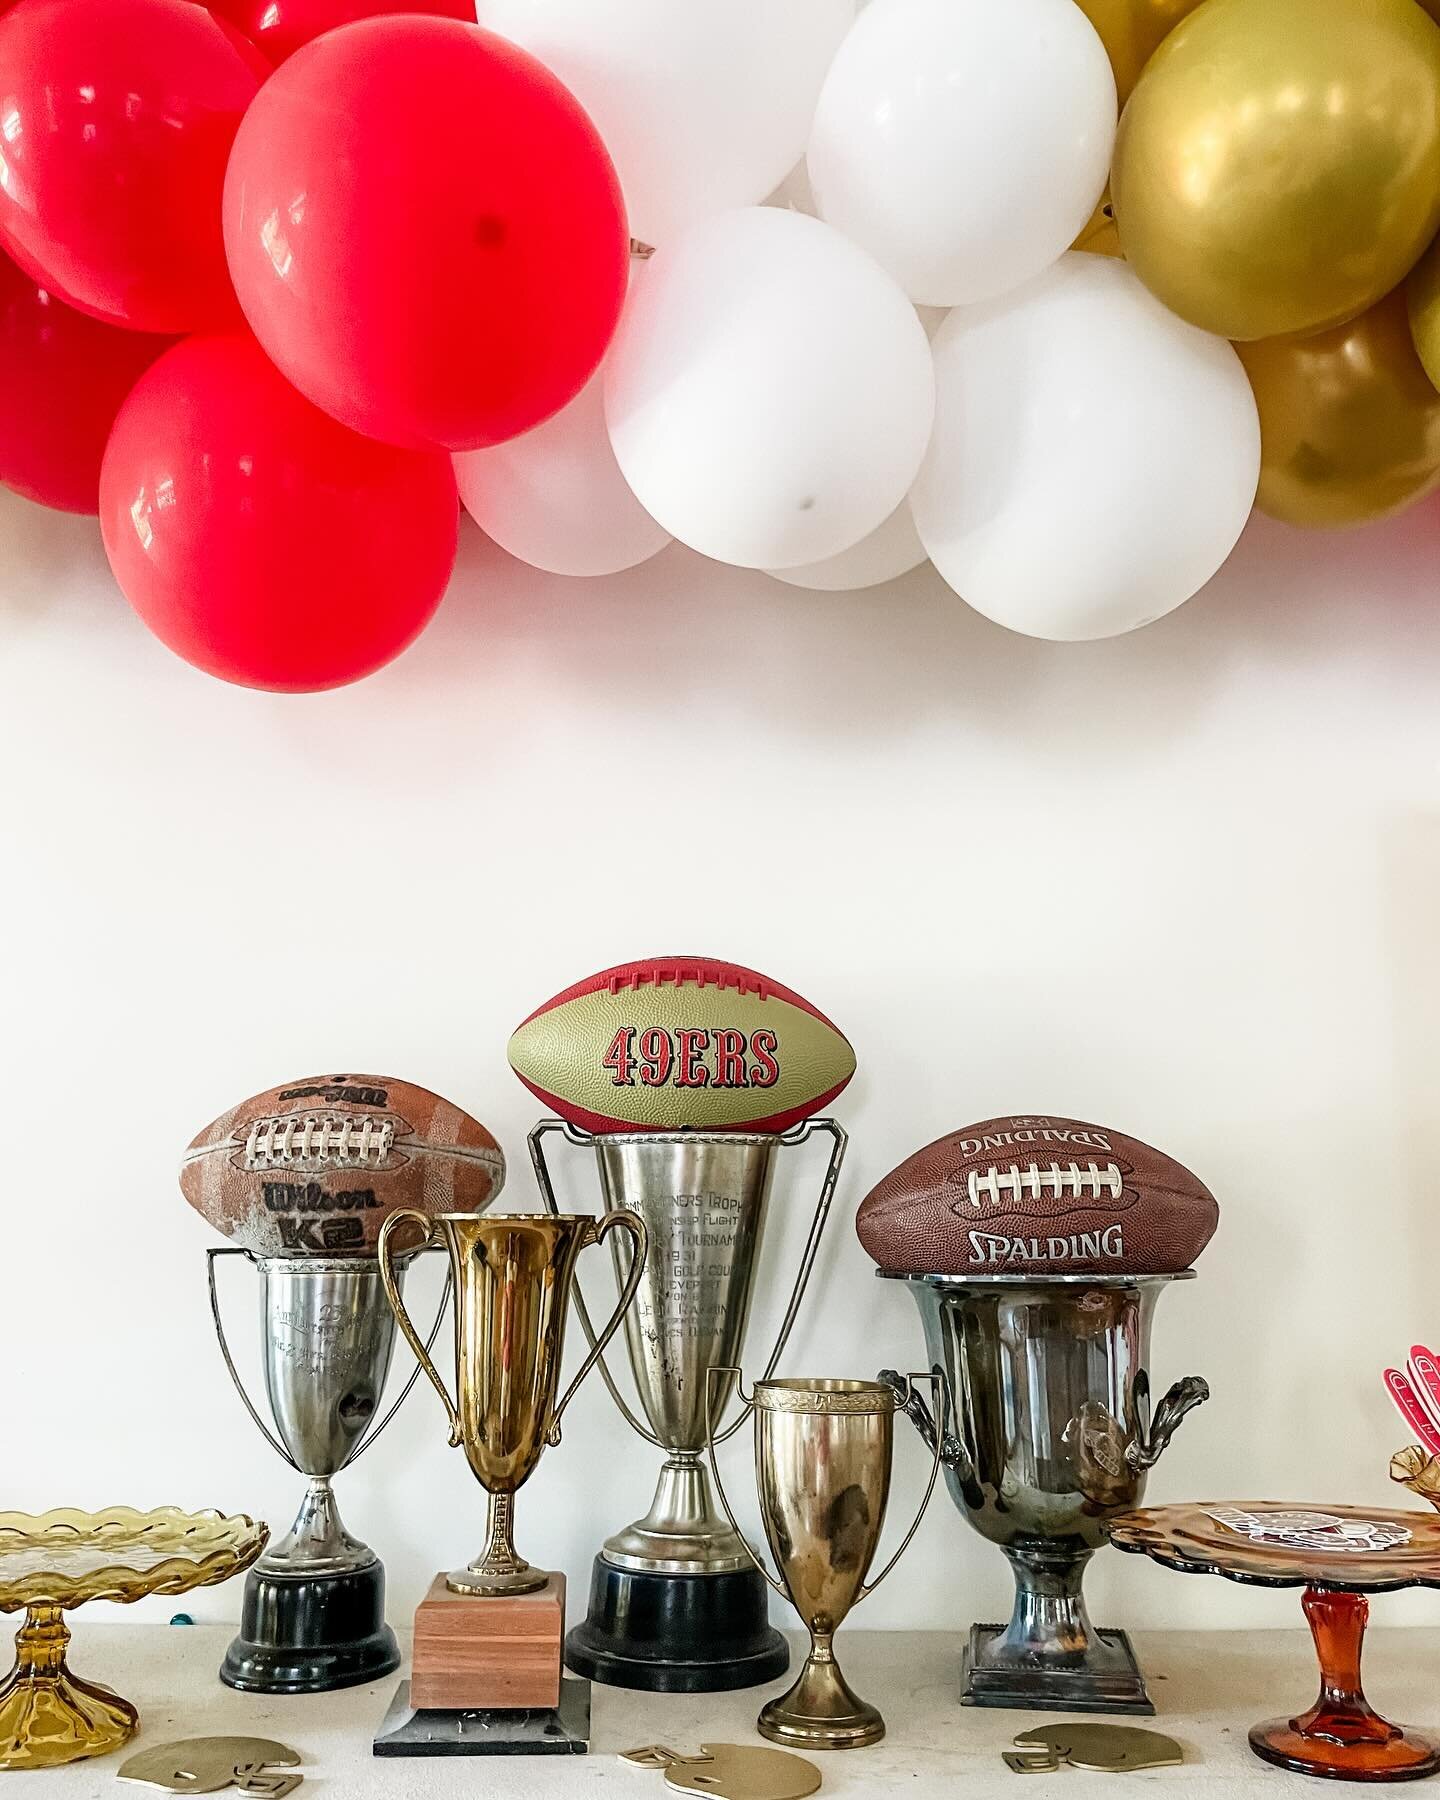 Go Niners! 

Its all in the details. We scoured and found some vintage footballs to add to our vintage trophies. Favors were all football inspired.  @roxyssweettreatssj created and nailed the on theme cookies and cake pops.  Football shaped ice cubes